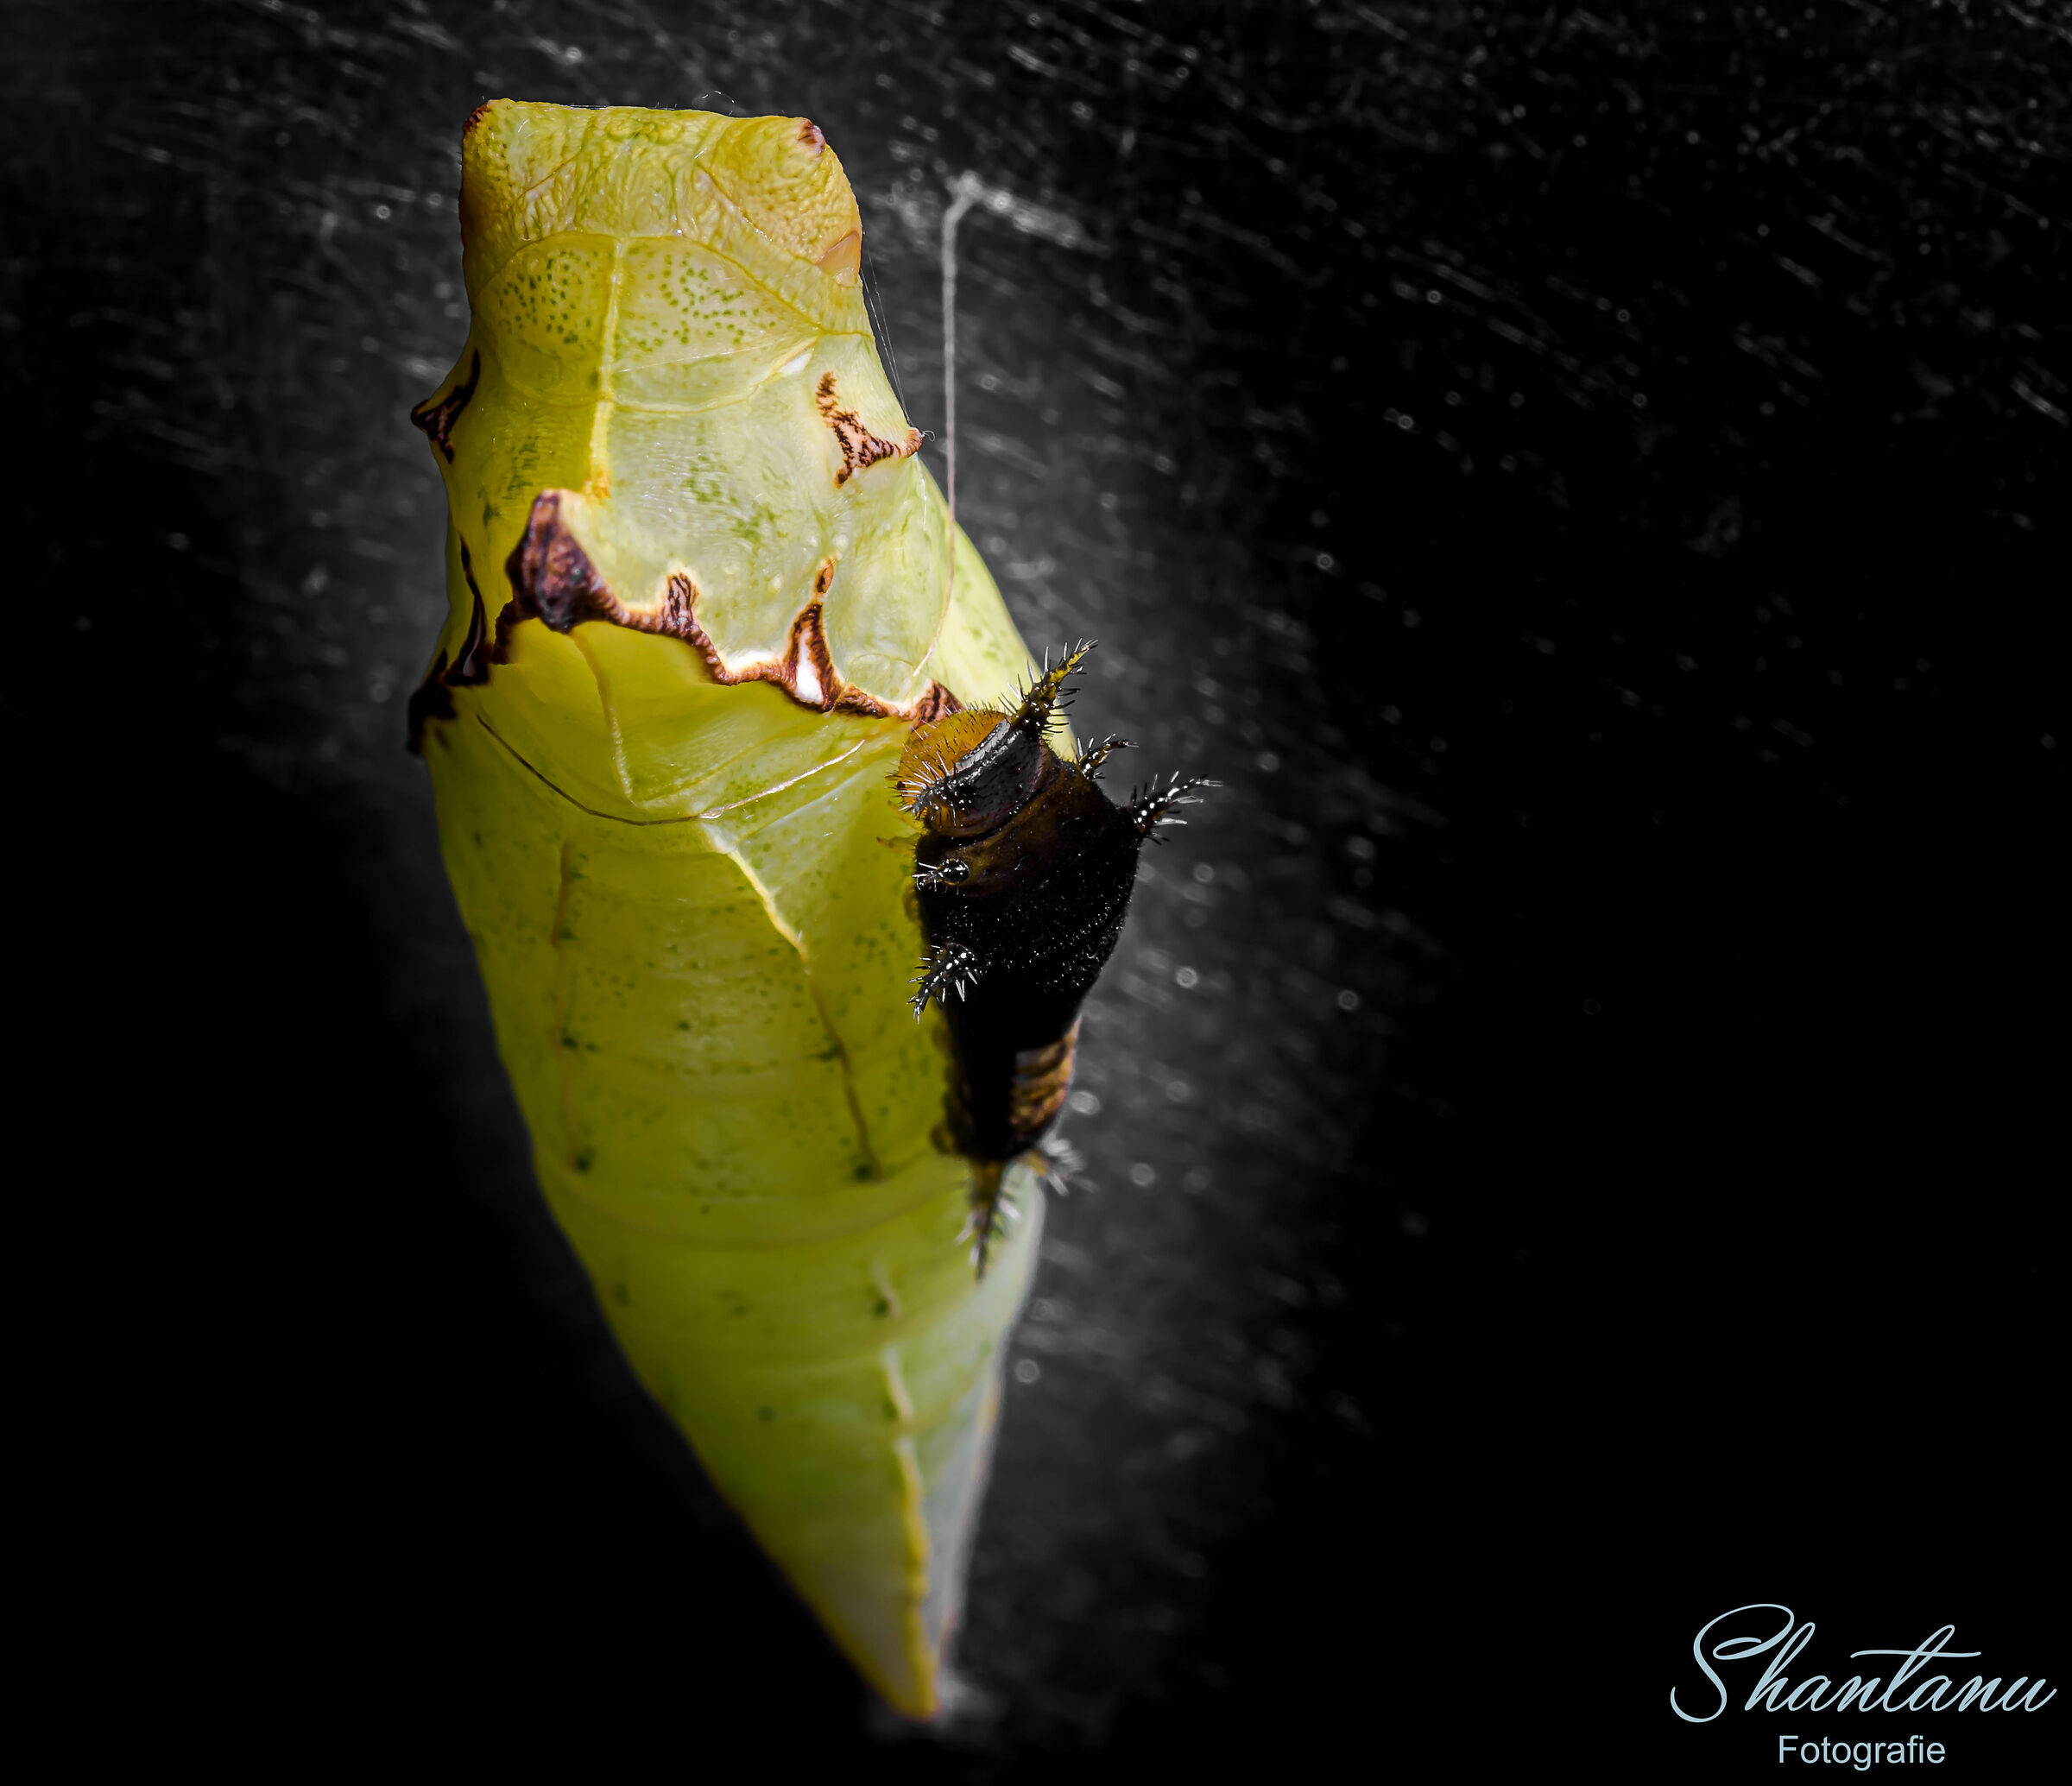 Caterpillar and Pupa of Tailed Jay...